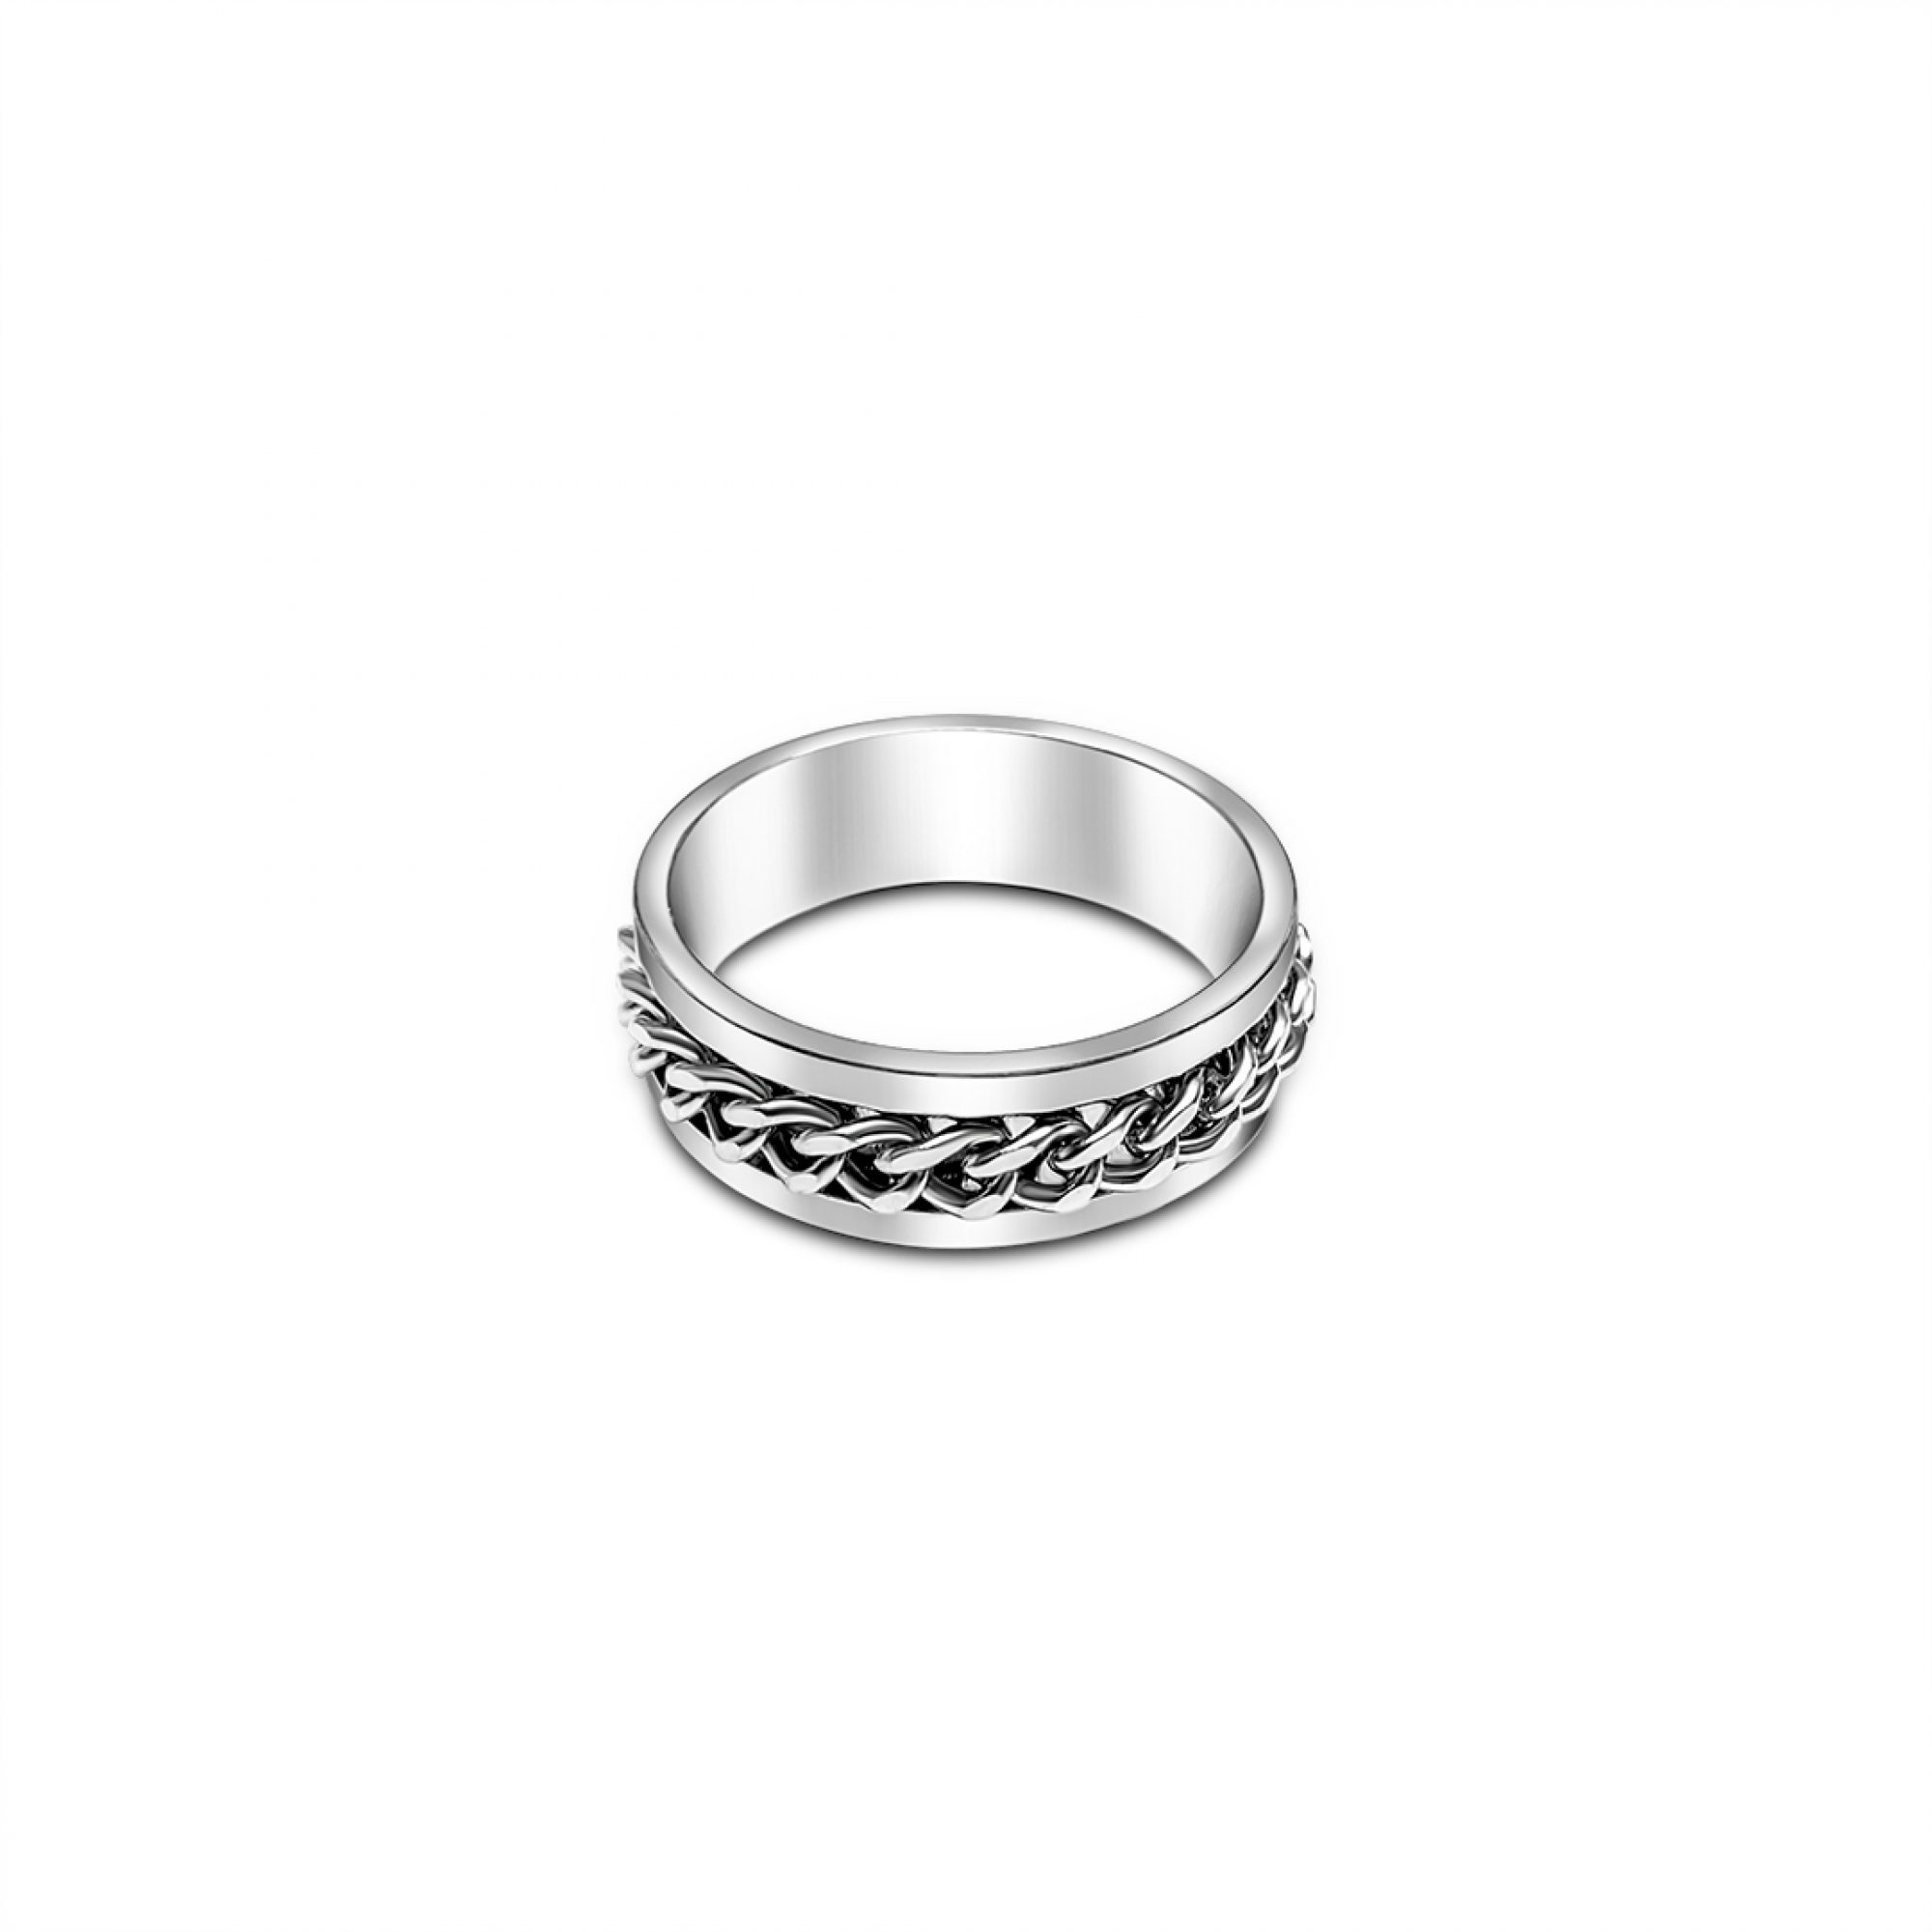 Steel ring with chain